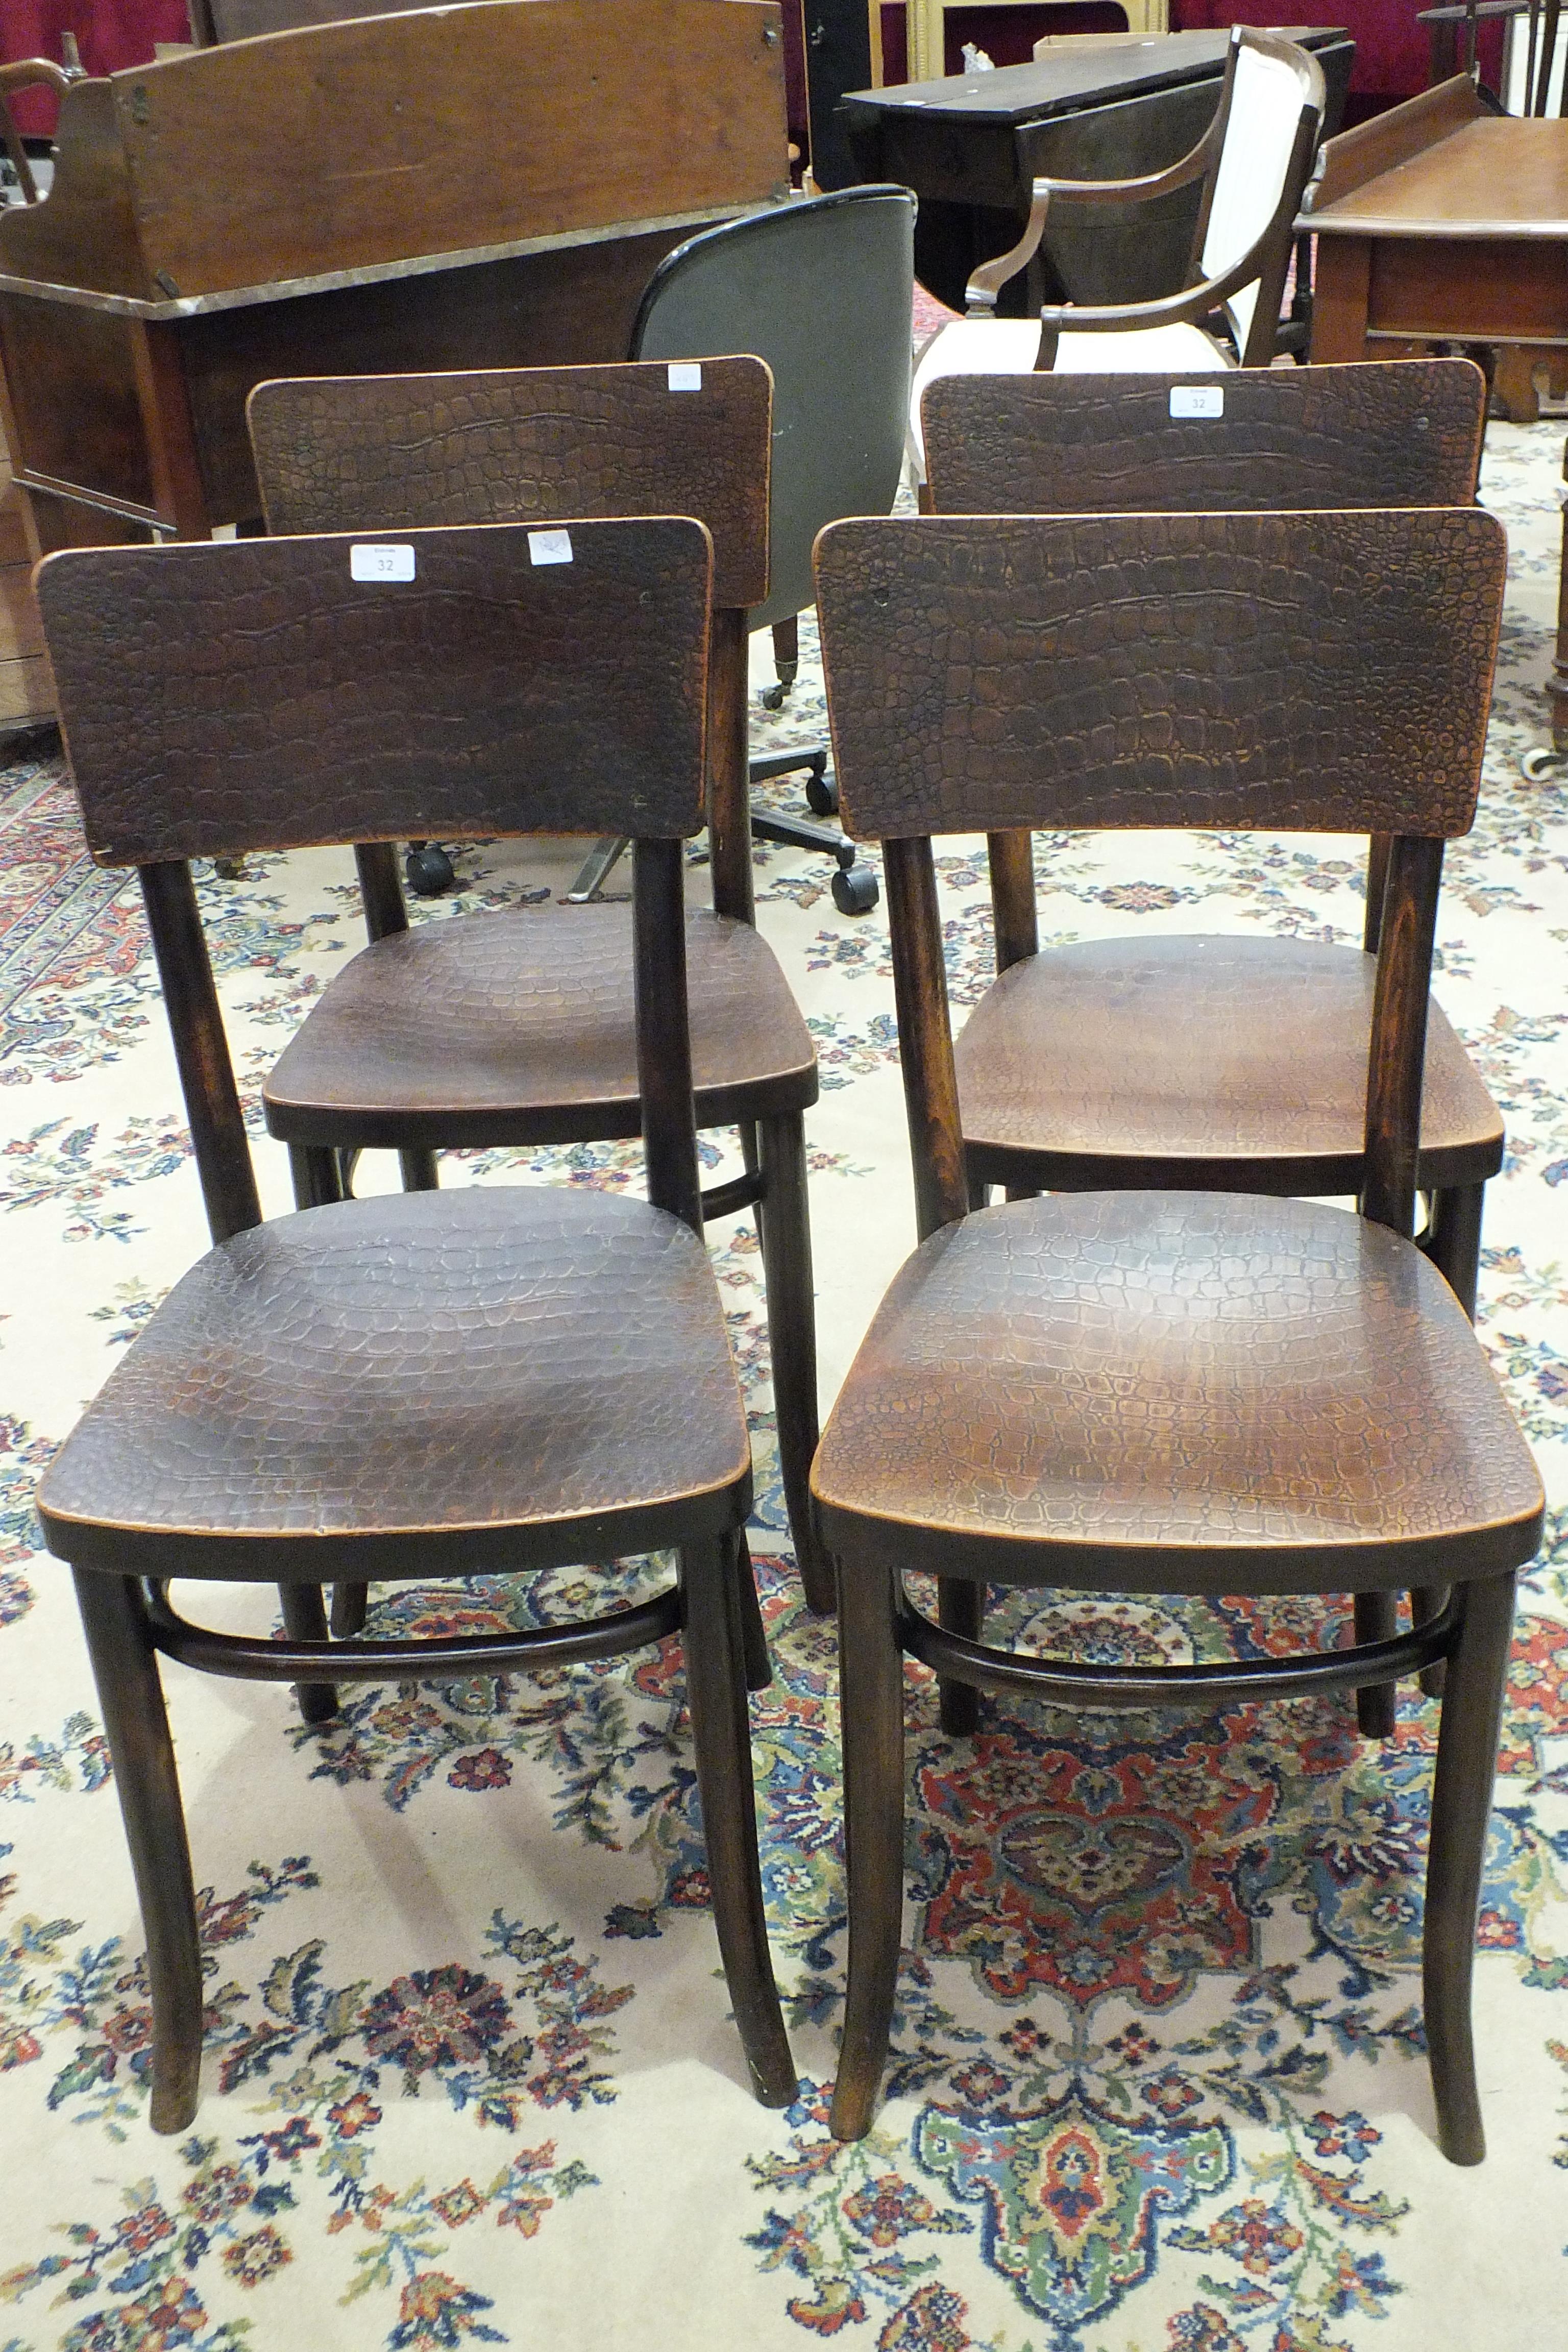 A set of four bentwood dining chairs with textured plywood seats and backs.